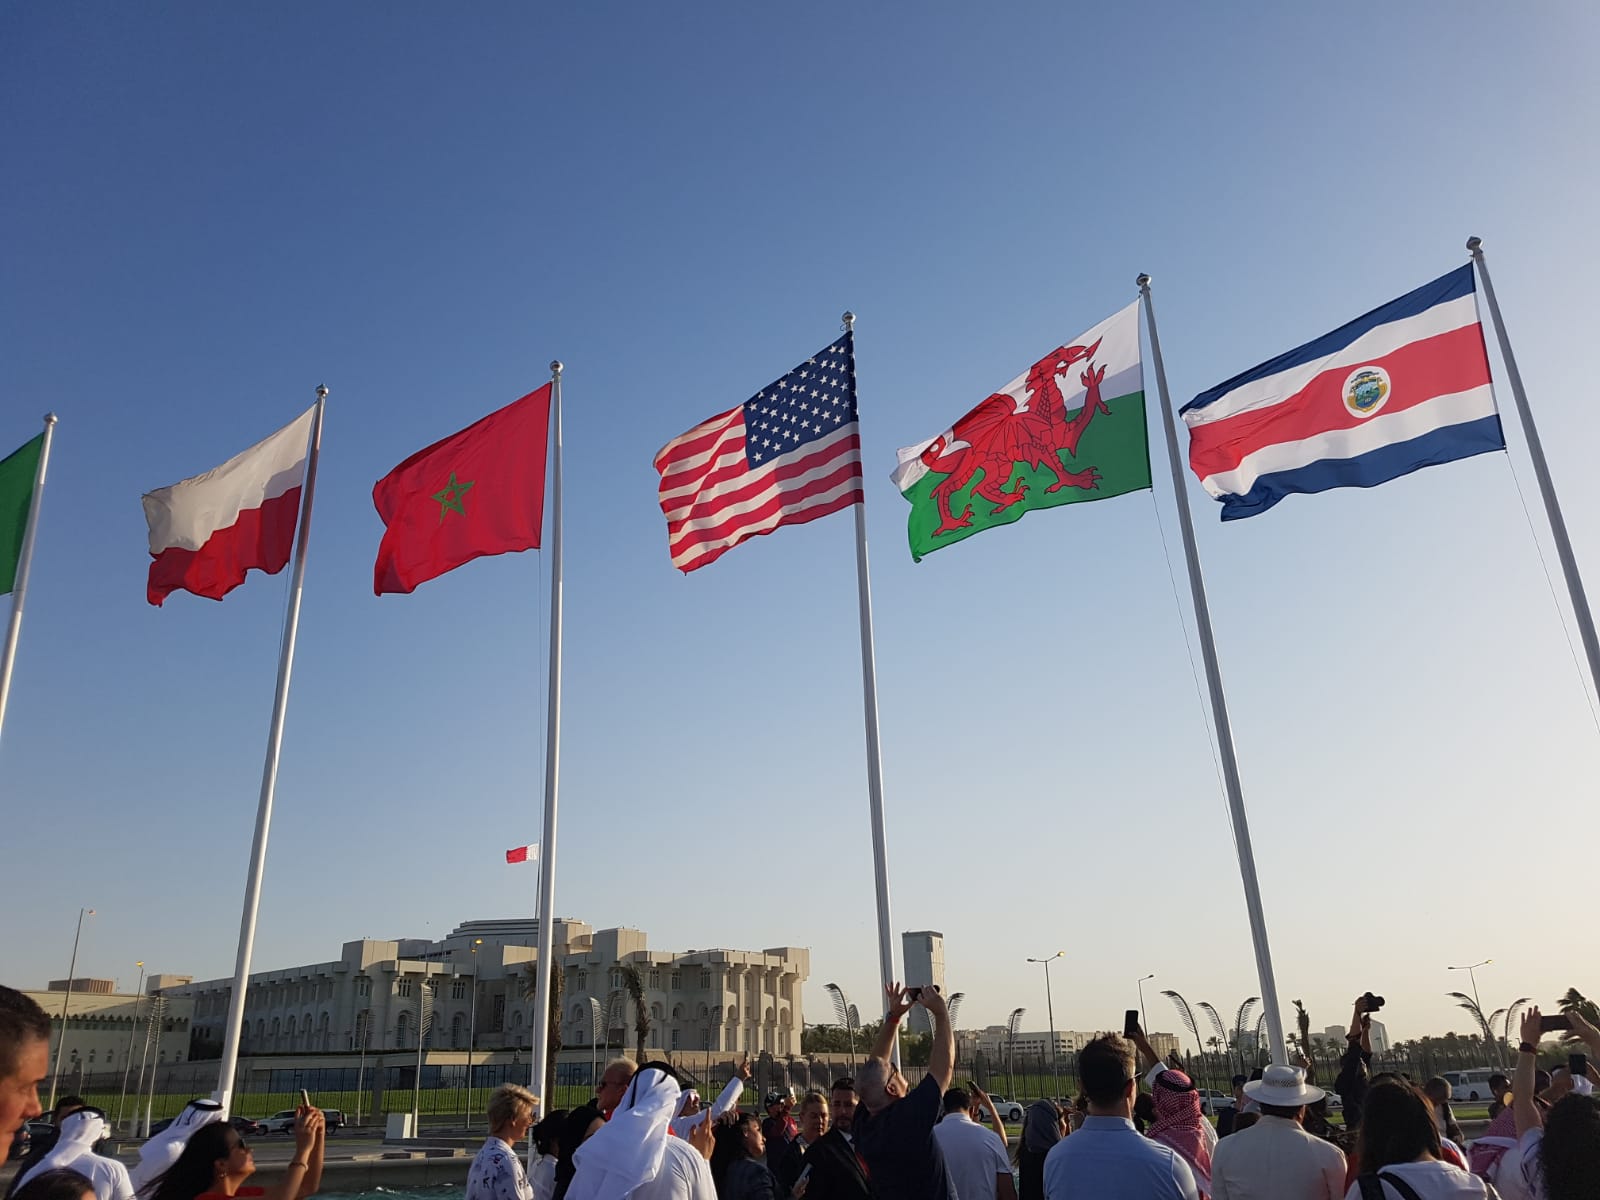 The Welsh flag beside the flags of the USA and Costa Rica. (FCDO/PA)